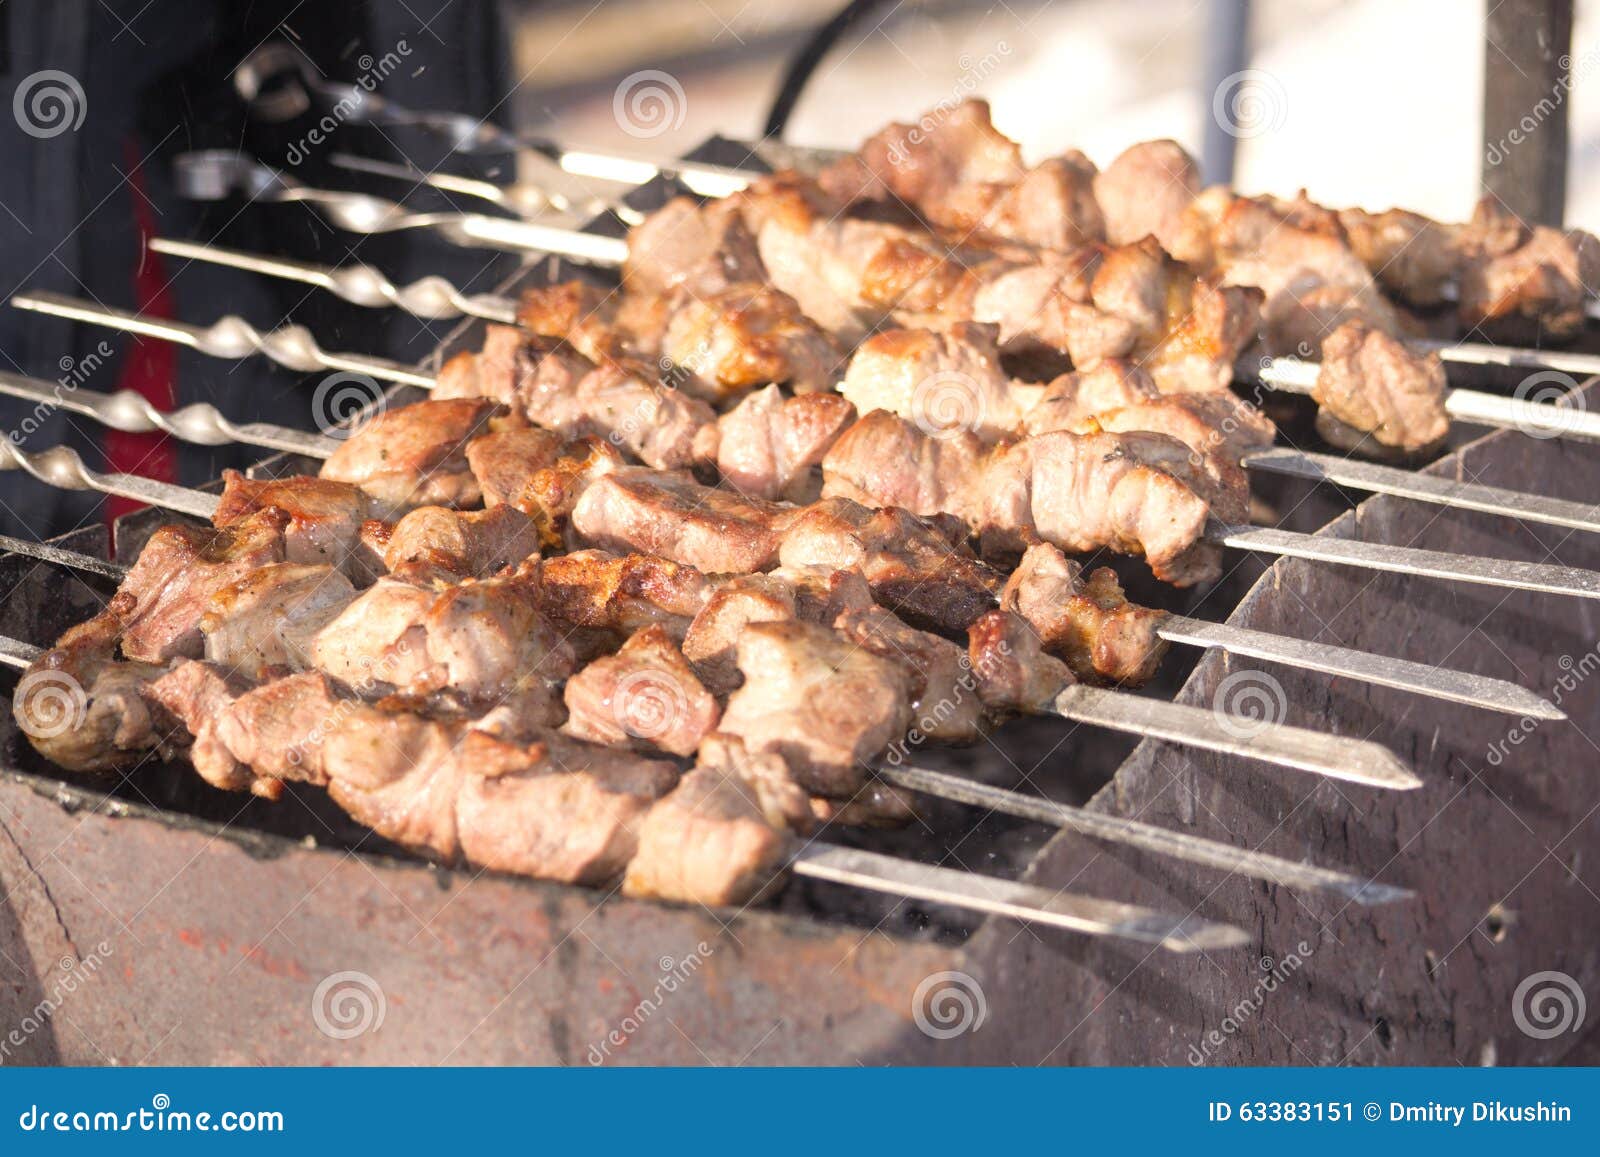 Chef Grilling Lamb Ribs on Flame Stock Image - Image of barbecue ...